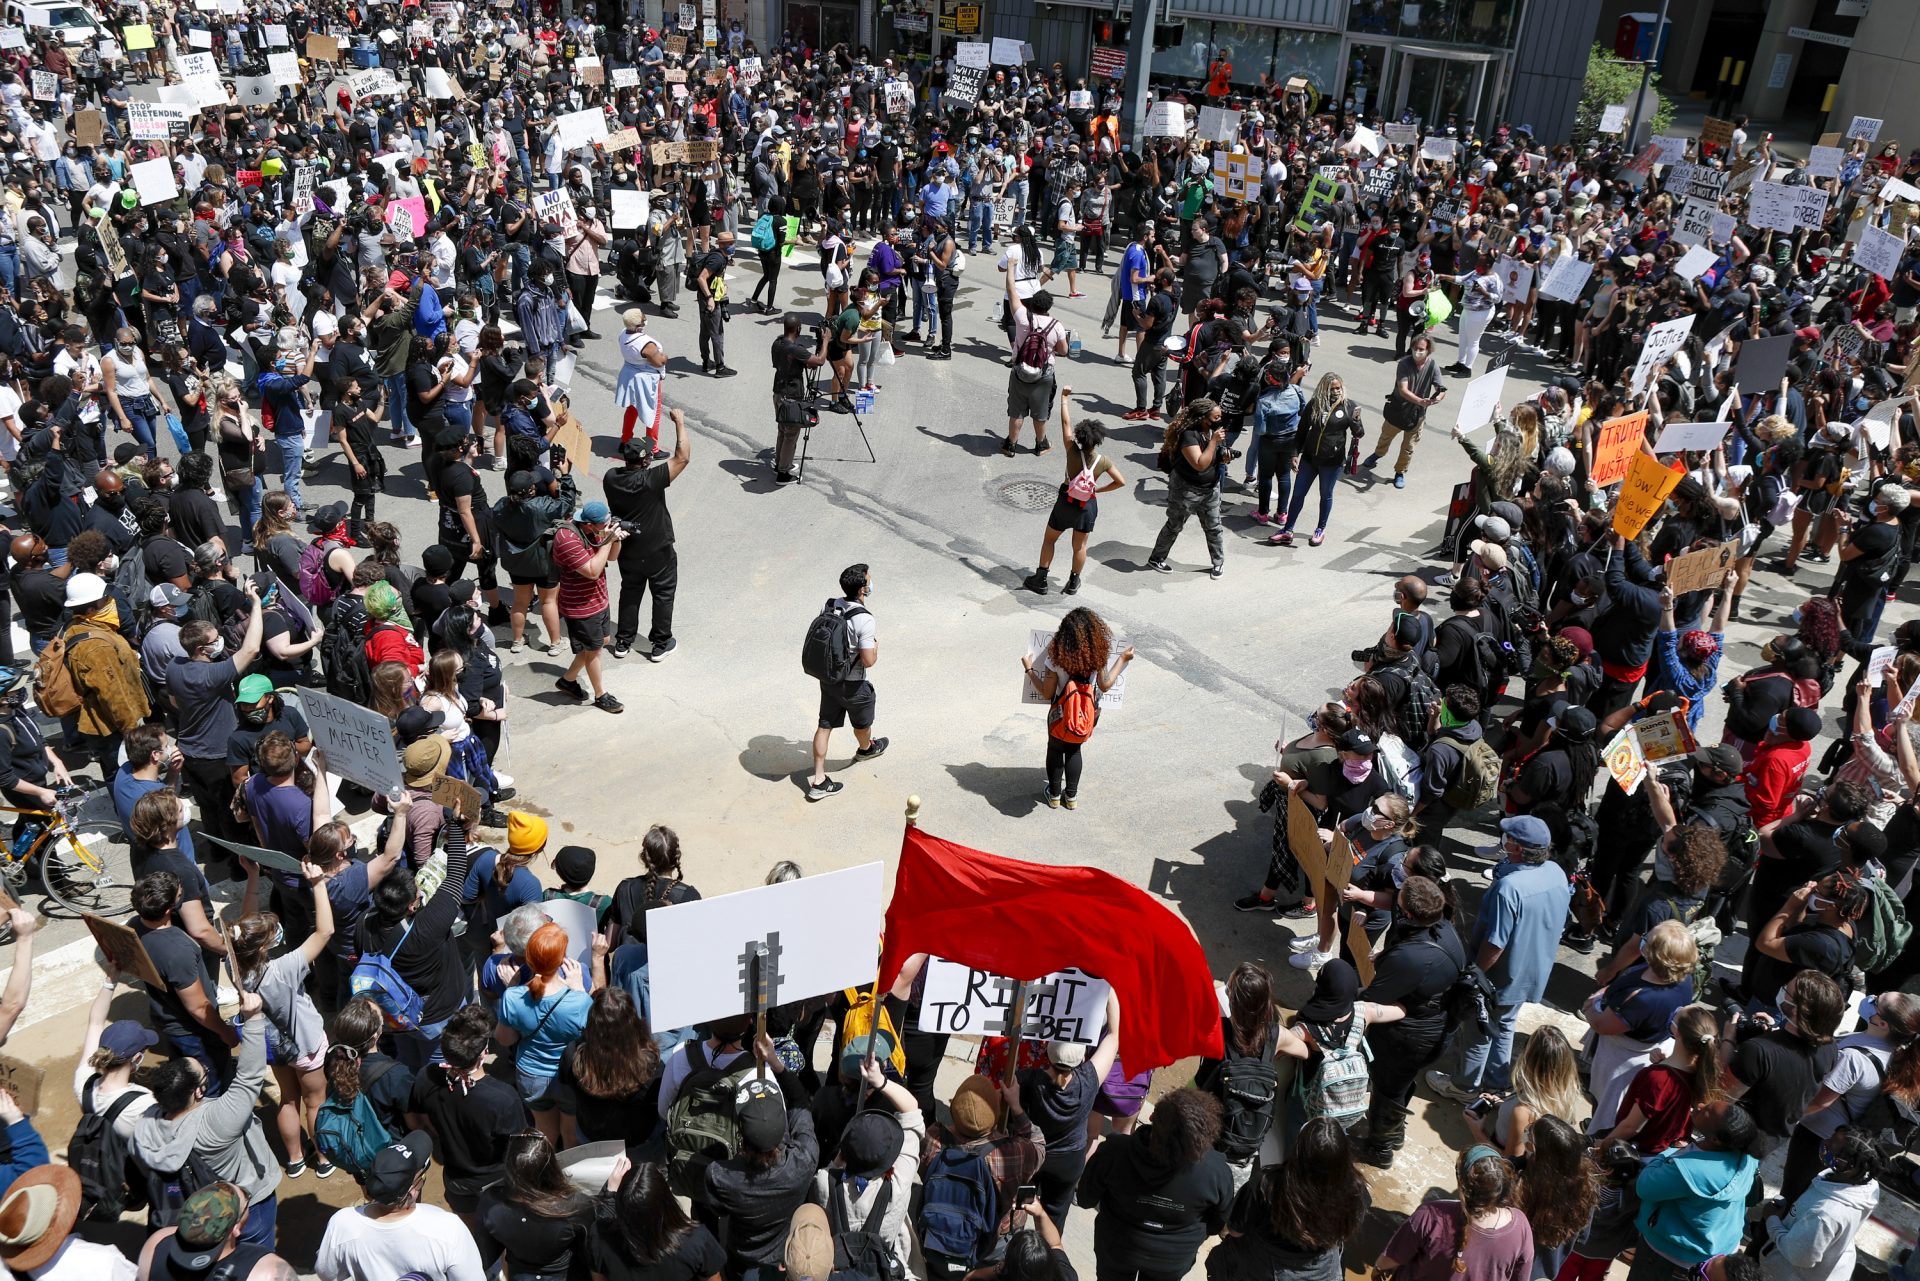 Demonstrators stop at an intersection during a march in Pittsburgh, Saturday, May 30, 2020 to protest the death of George Floyd, who died after being restrained by Minneapolis police officers on Memorial Day, May 25